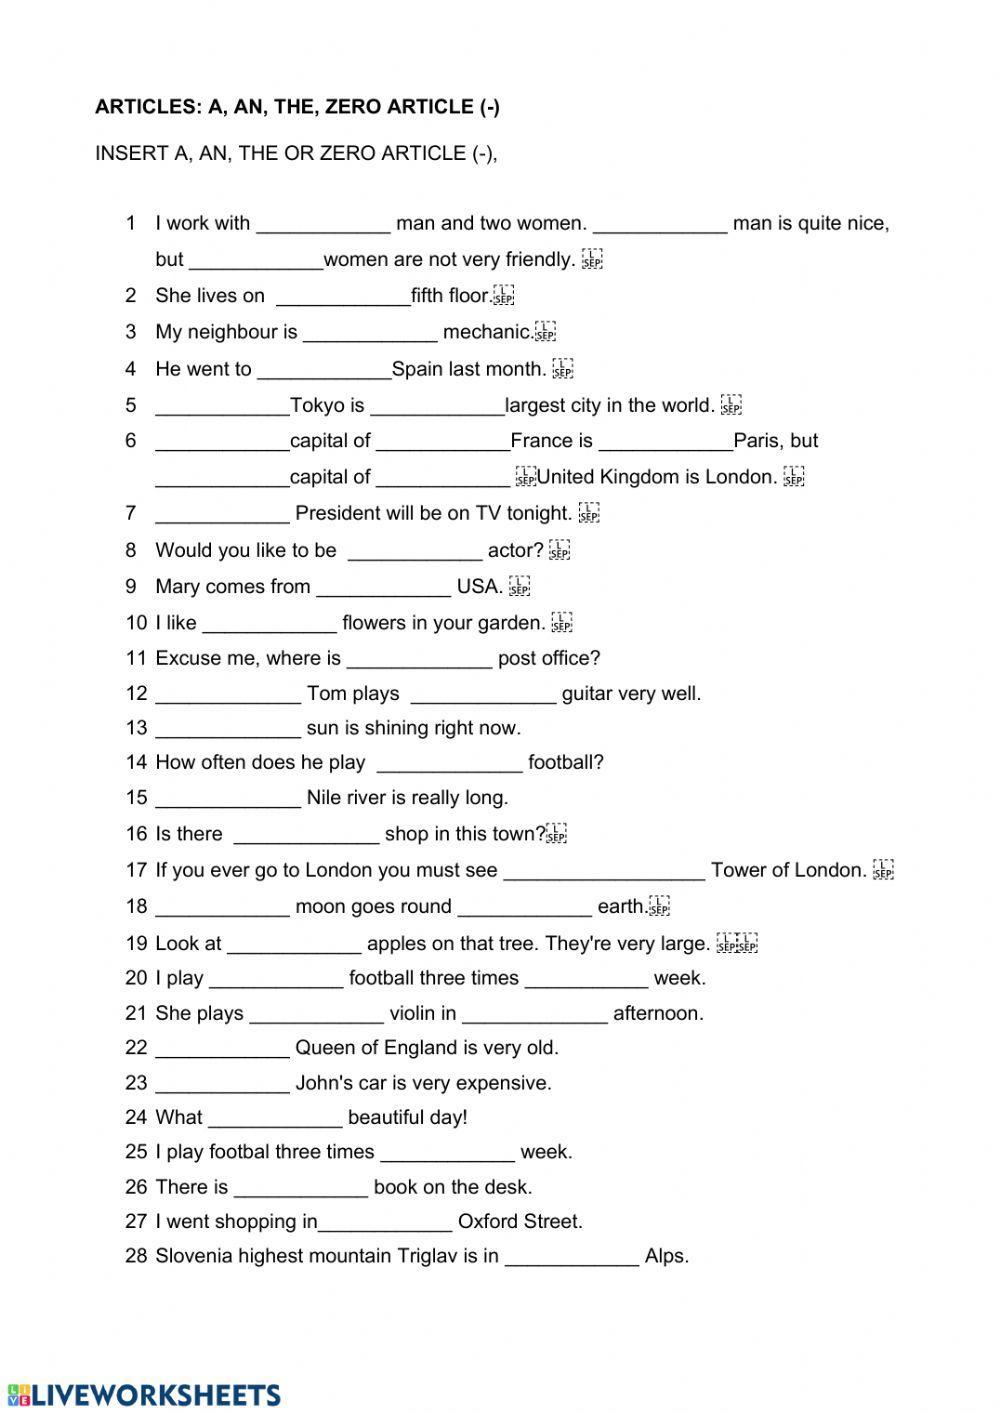 definite-and-indefinite-articles-exercise-live-worksheets